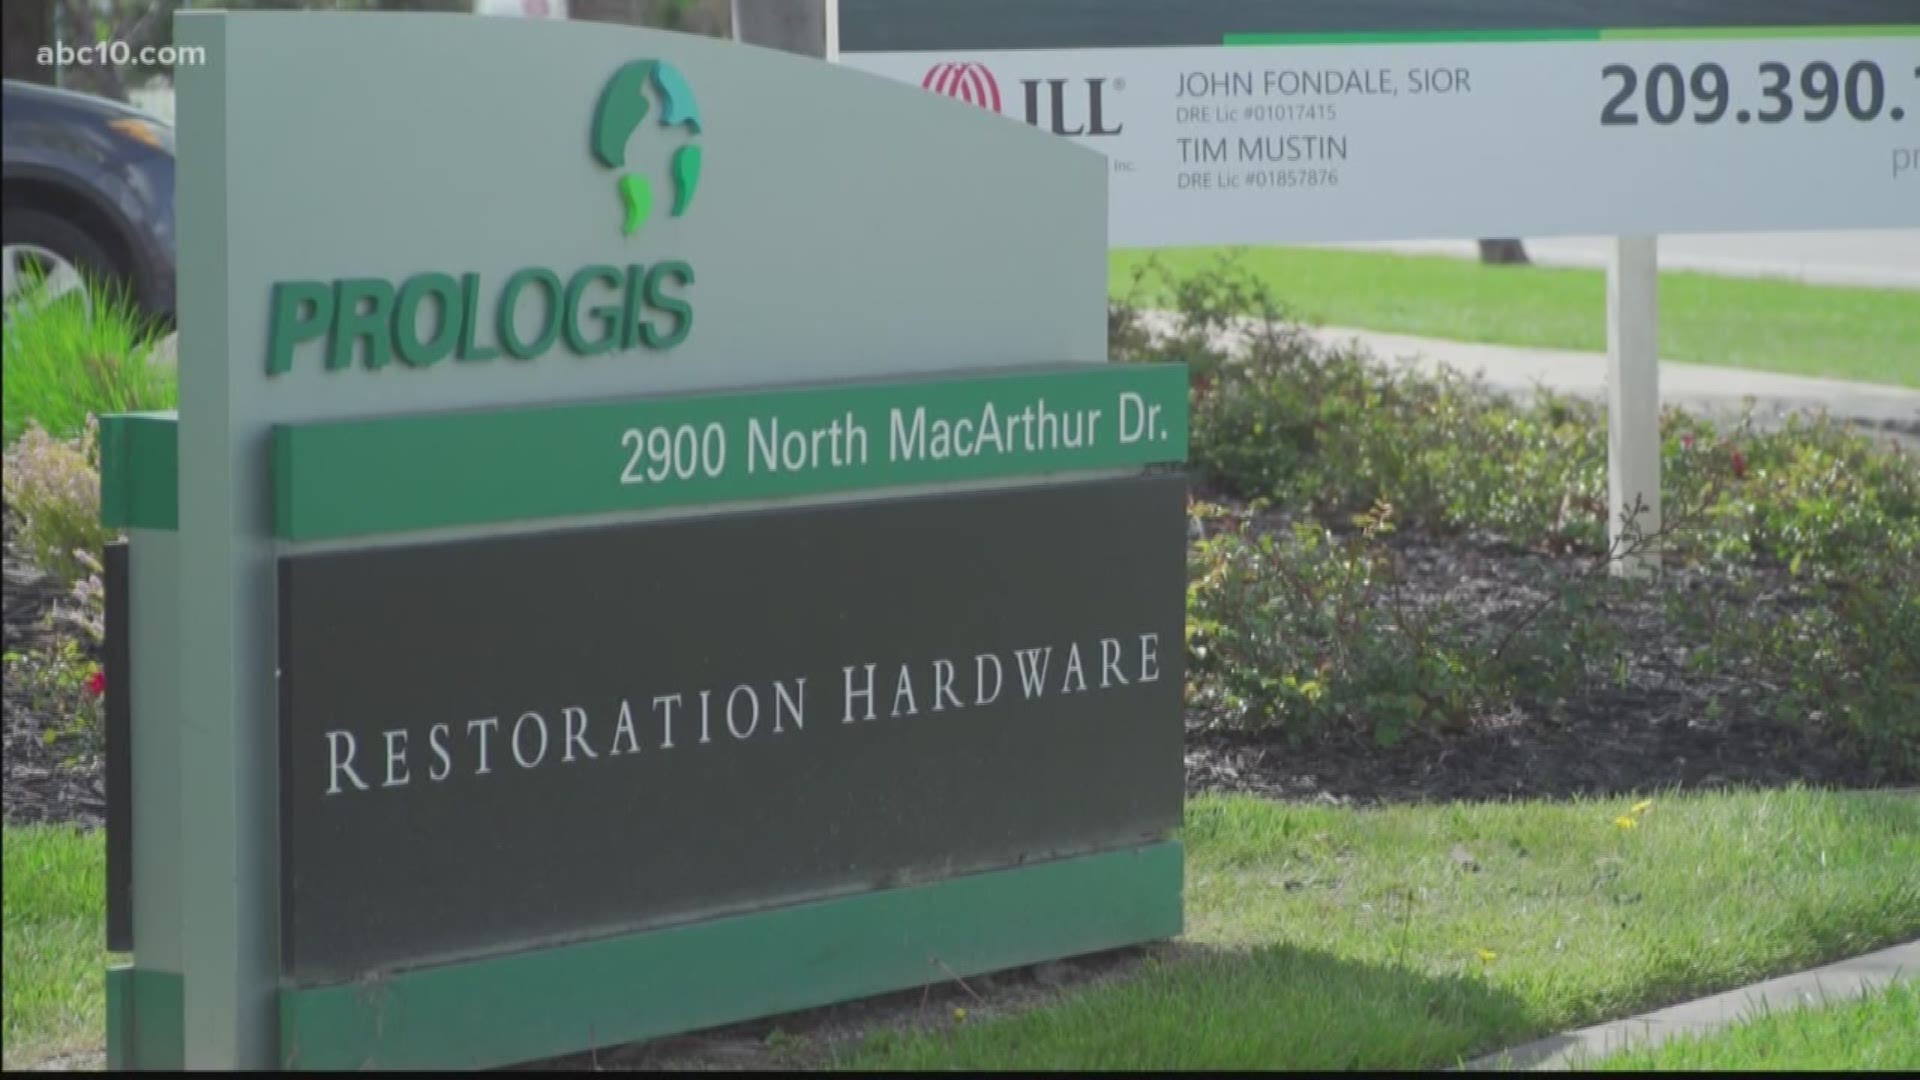 Workers at Tracy's Restoration Hardware call center tell ABC10 they are concerned about working in the office environment during the coronavirus crisis.